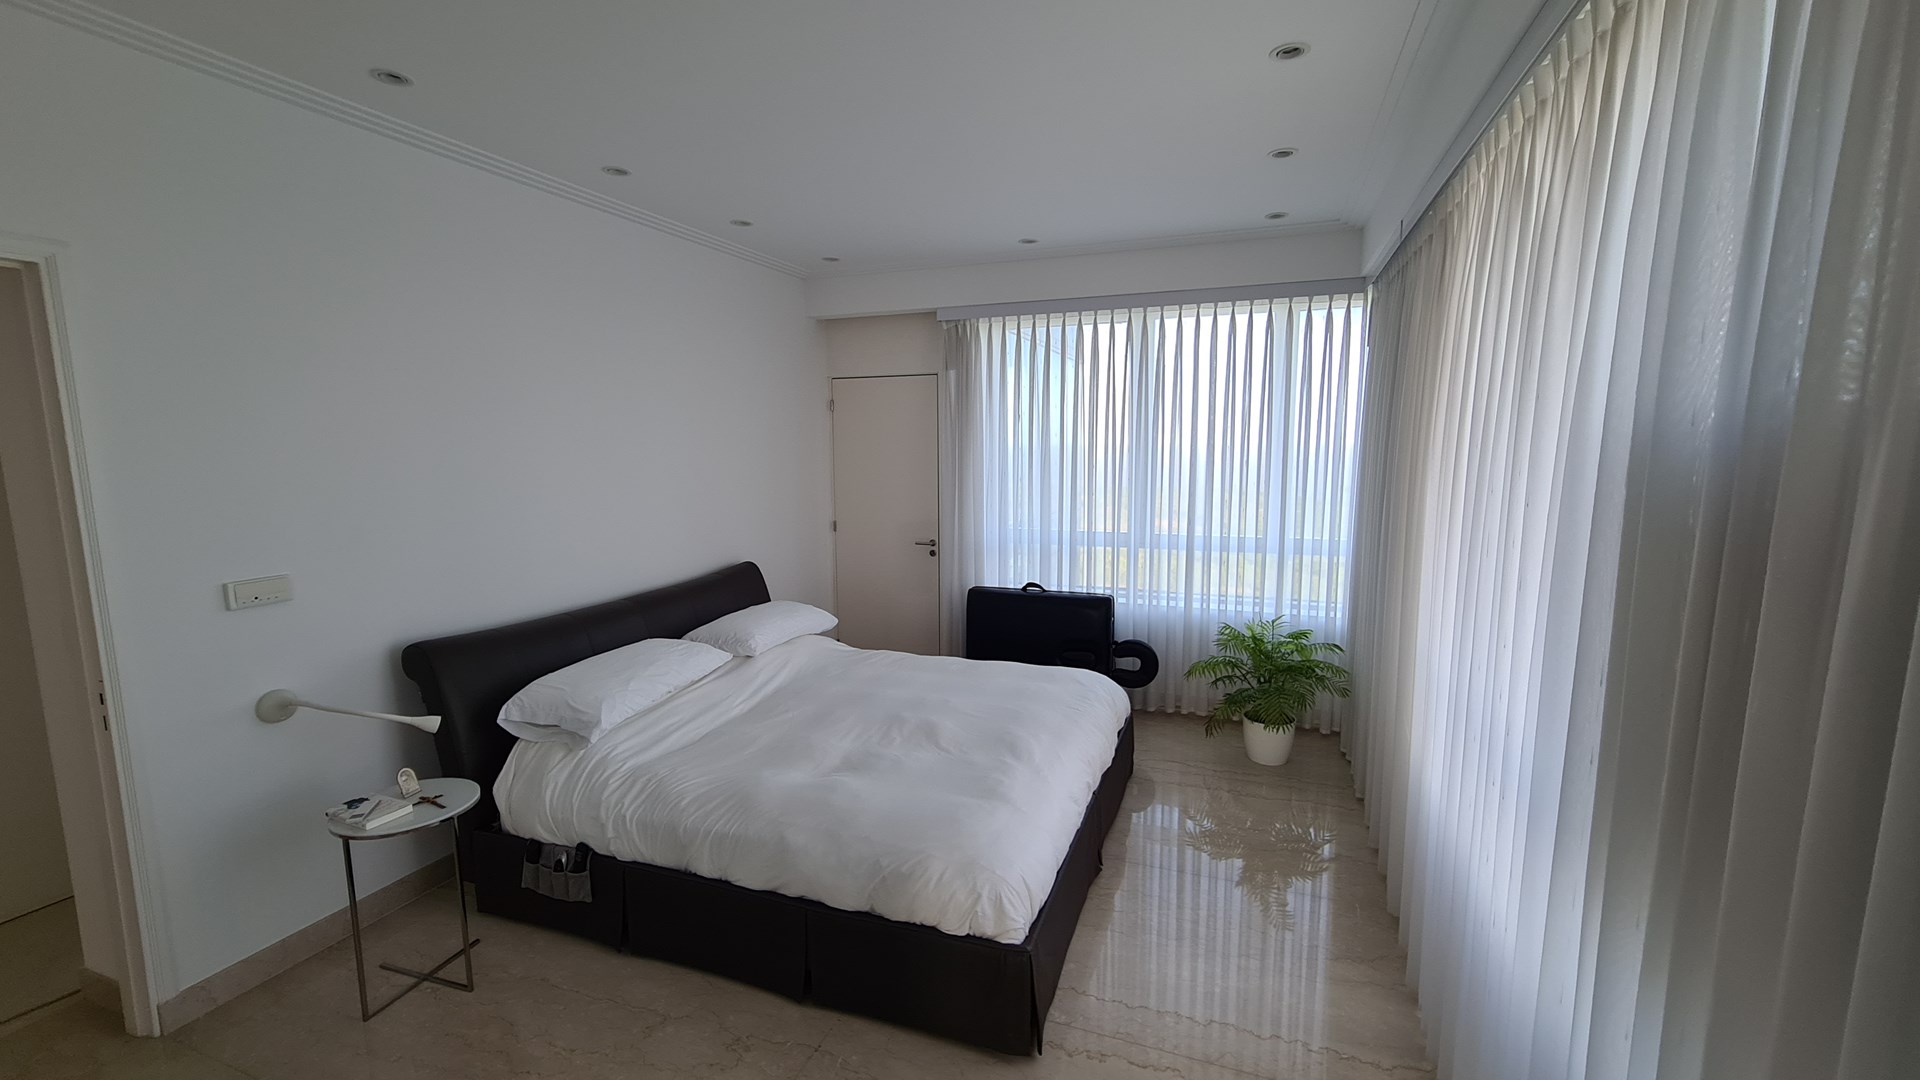 #2336687 | Rental | Apartment | Puerto Madero (JCh Brokers)